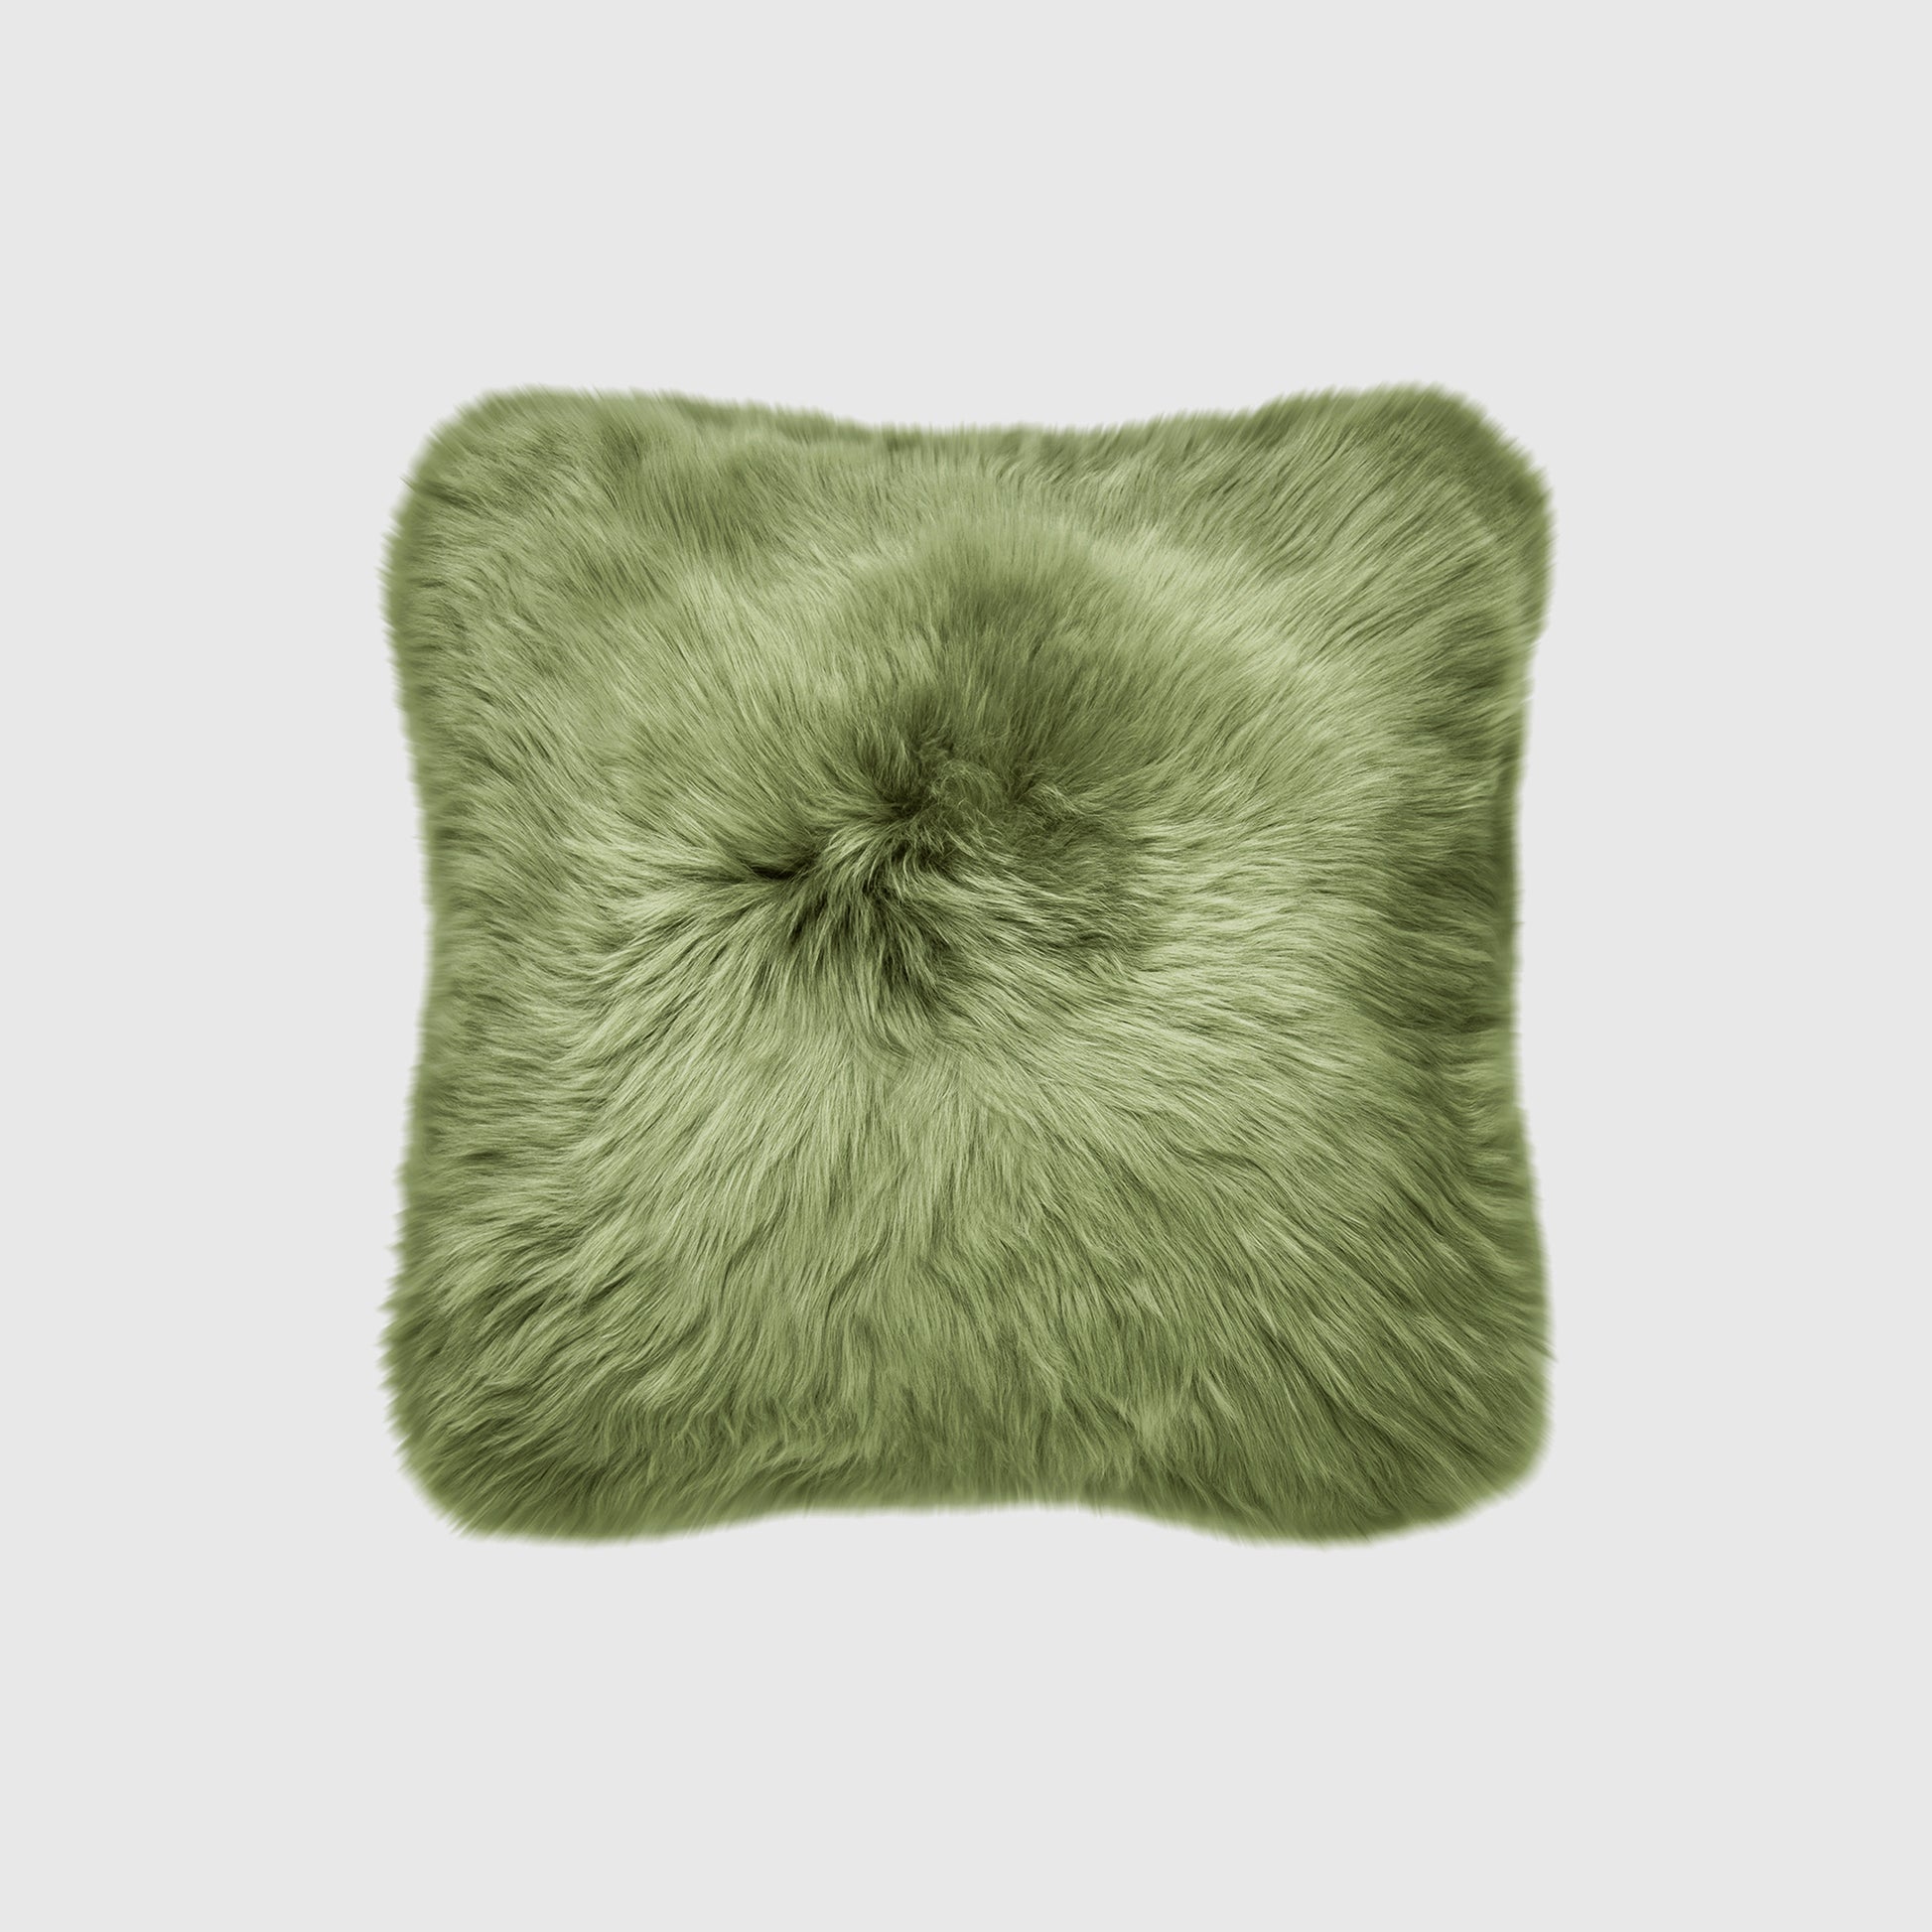 The Mood | Charlie Sheepskin Double-sided 16"x16" Pillow, Leaf Green